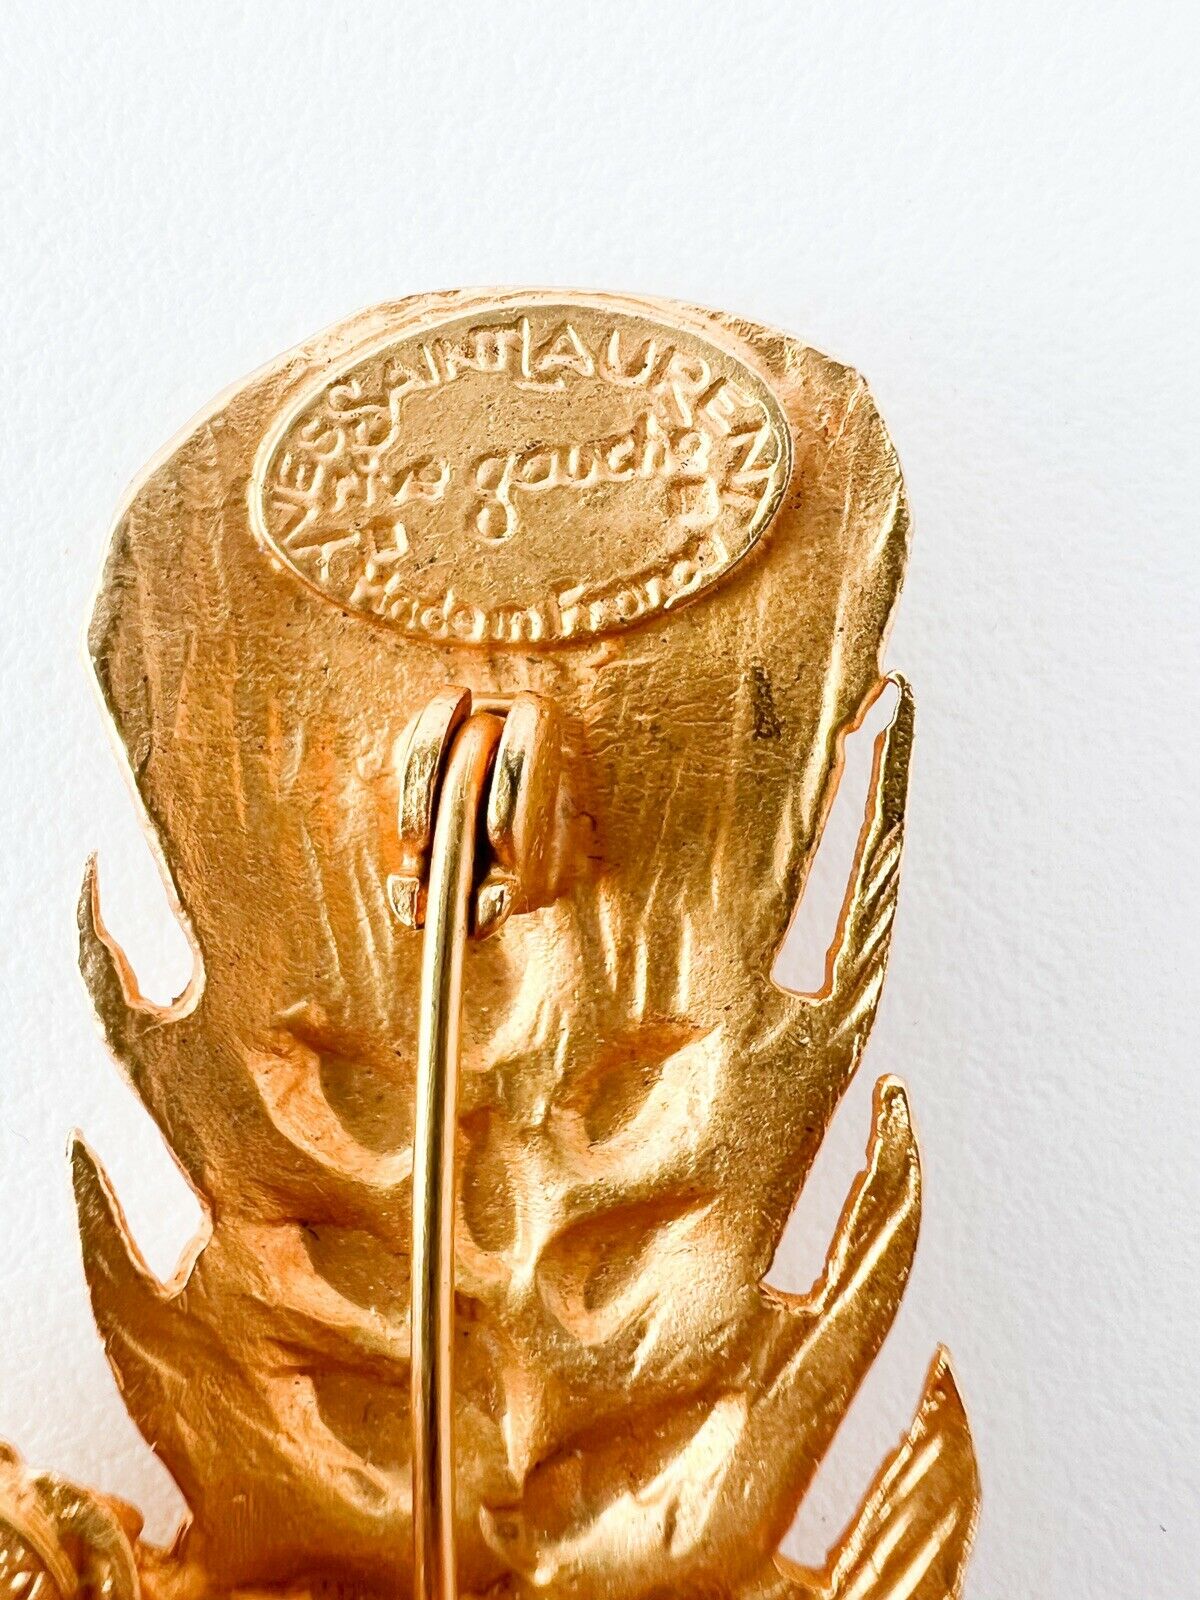 【SOLD OUT】YSL Yves Saint Laurent Rive Gauche By Robert Goossens Wheat Large brooch Pin Made in France Vintage